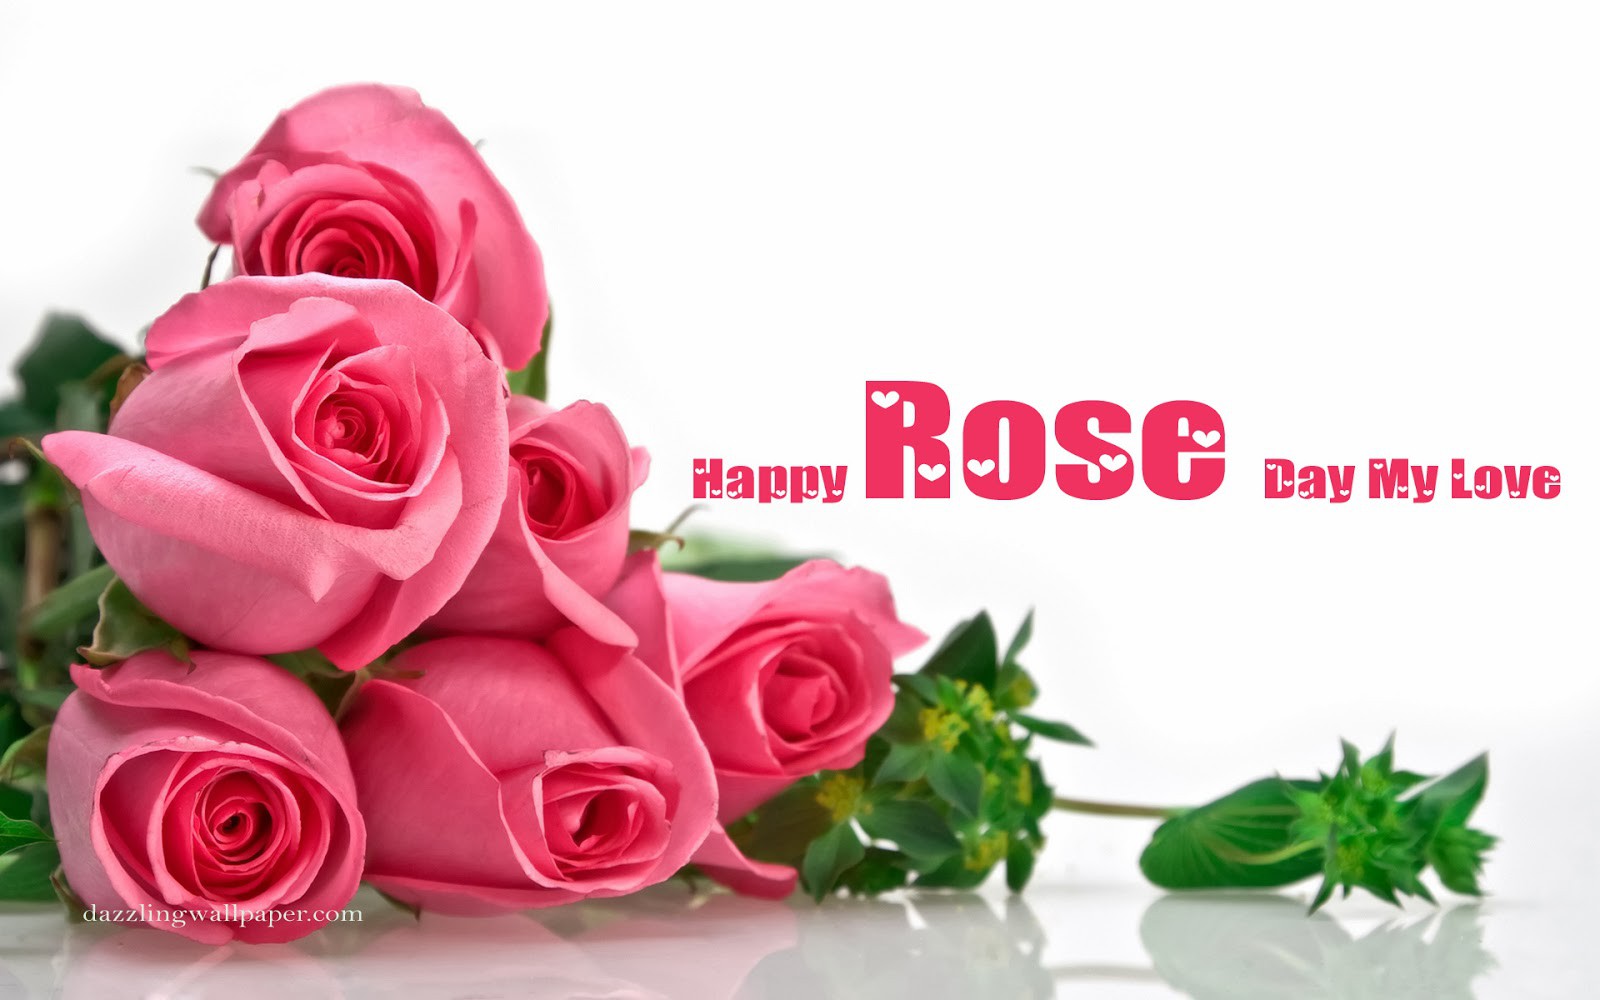 Happy Rose Day My Love - Good Morning Pink Rose - HD Wallpaper 